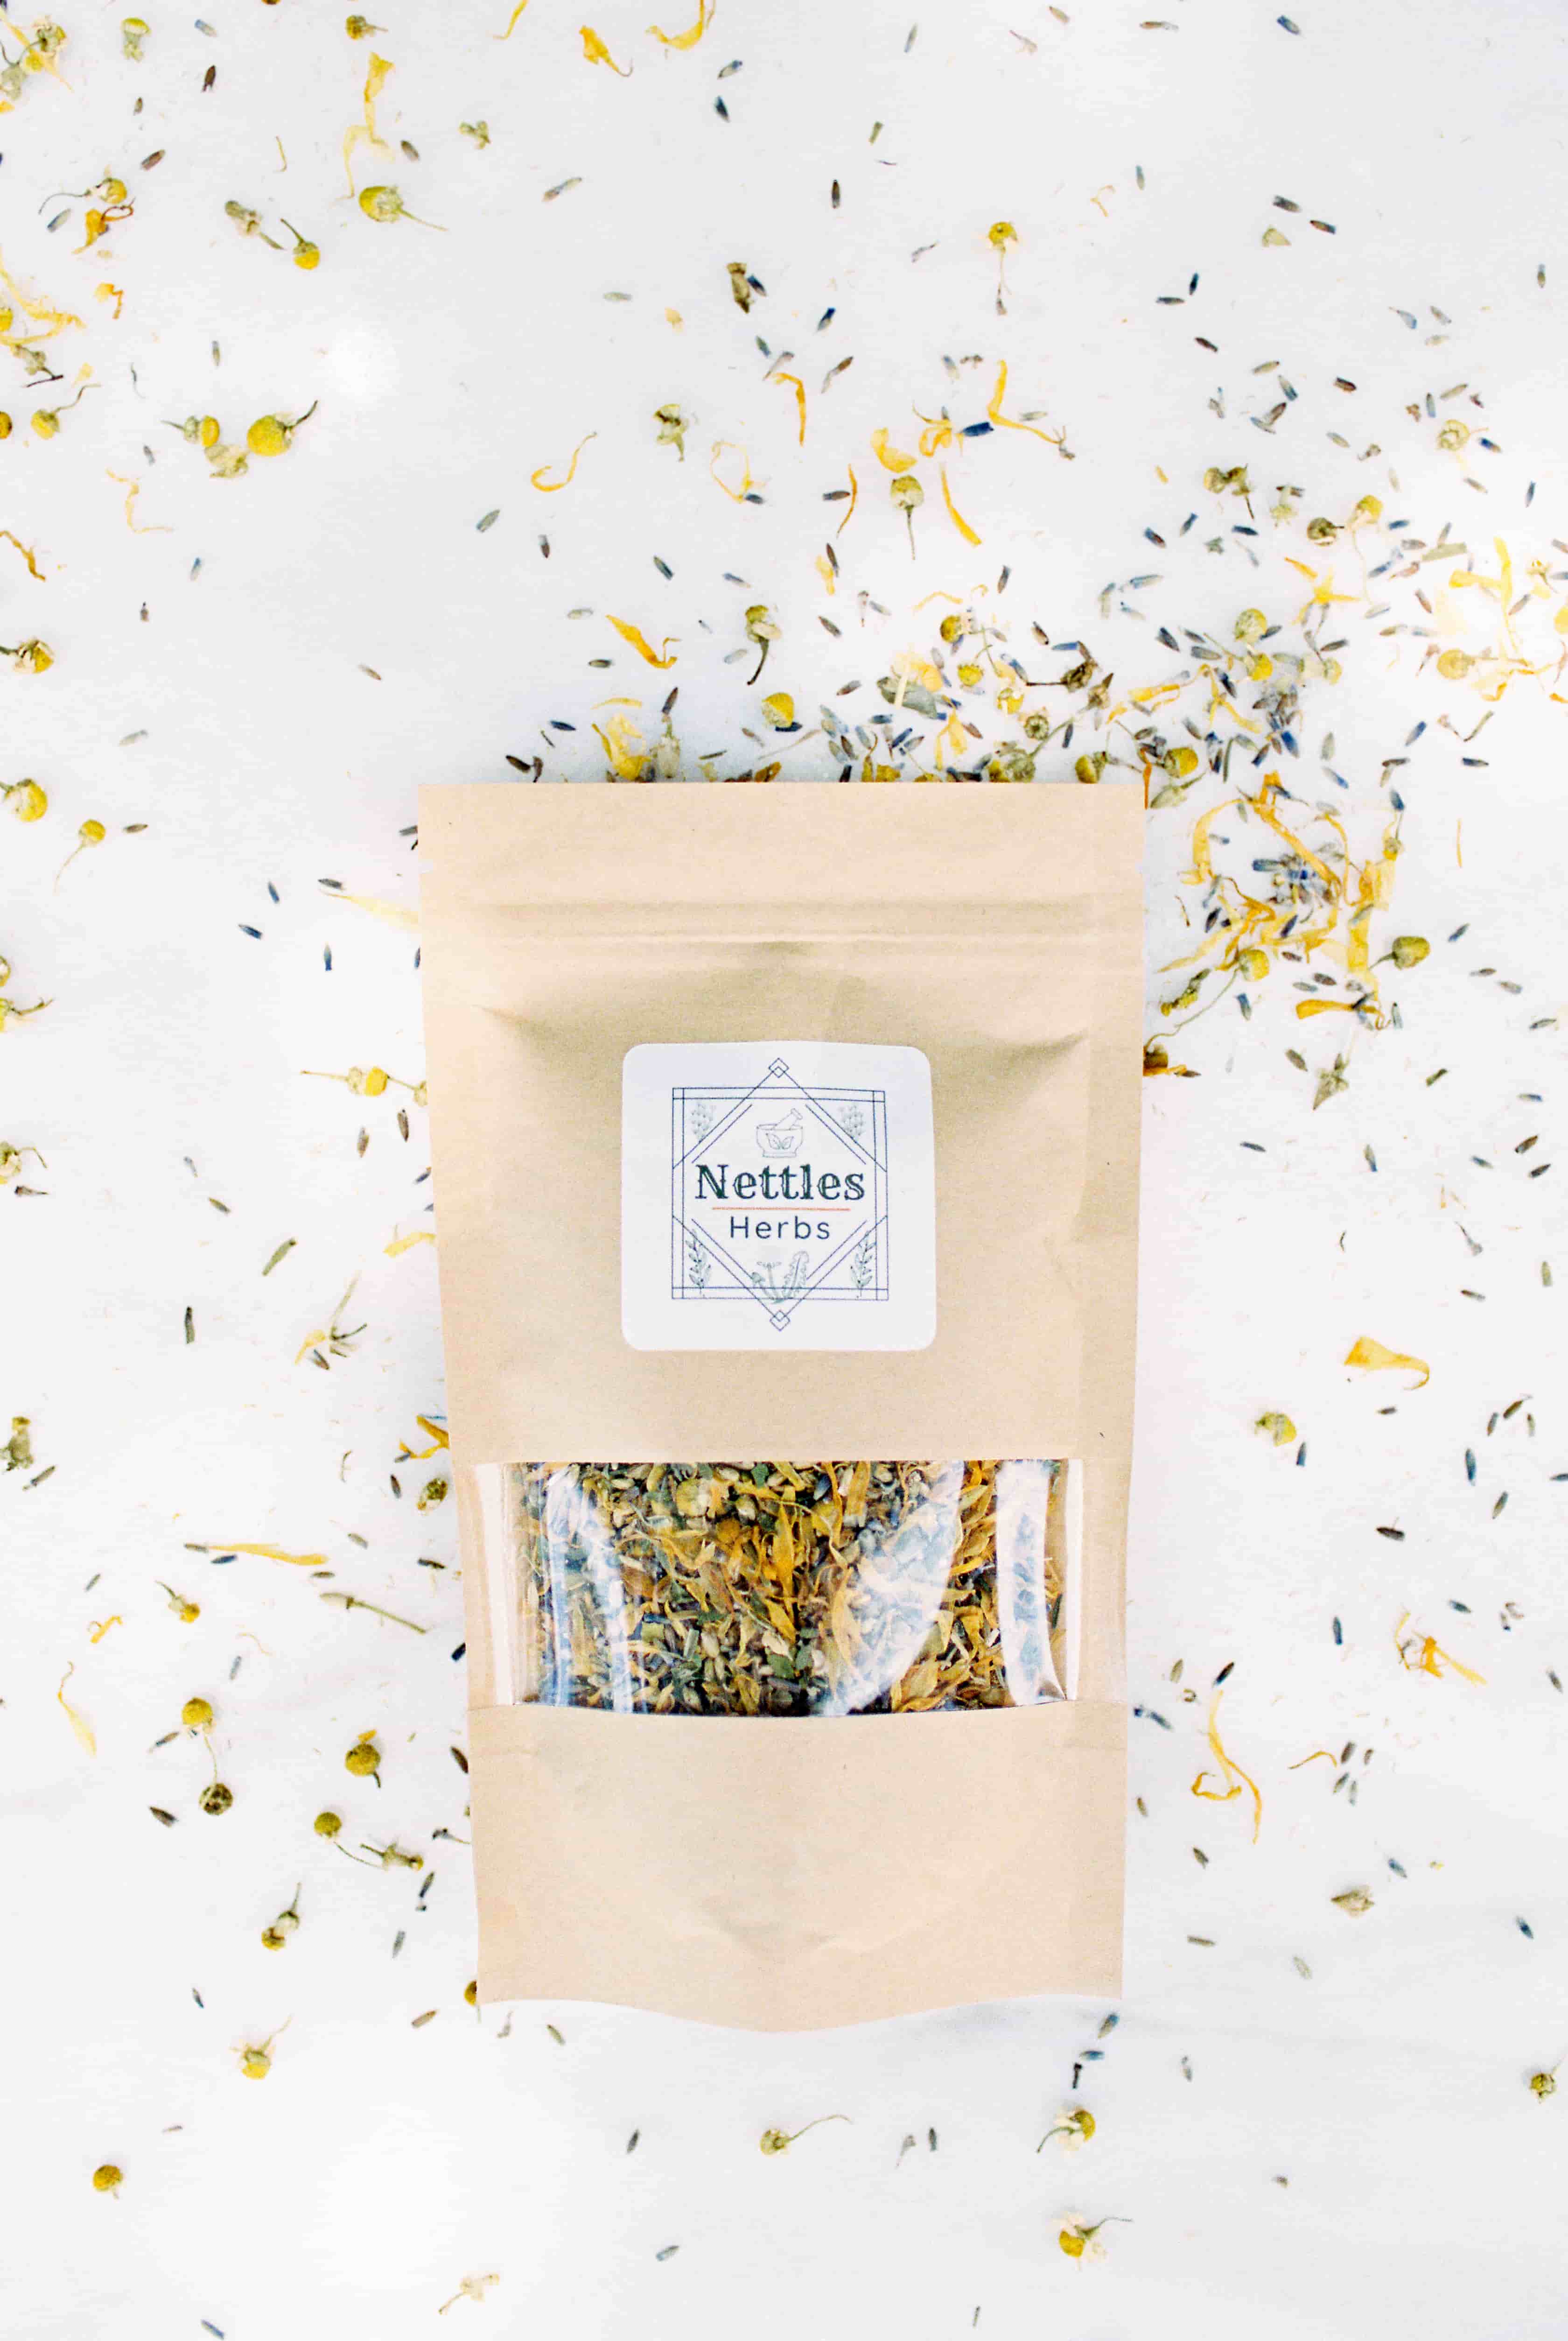 Soothing Relief is a blend of organic herbs that provide anti-inflammatory, vulnerary and antimicrobial properties. Made using organic yarrow, organic marshmallow leaf, organic lavender, organic chamomile, organic calendula, and sea salt